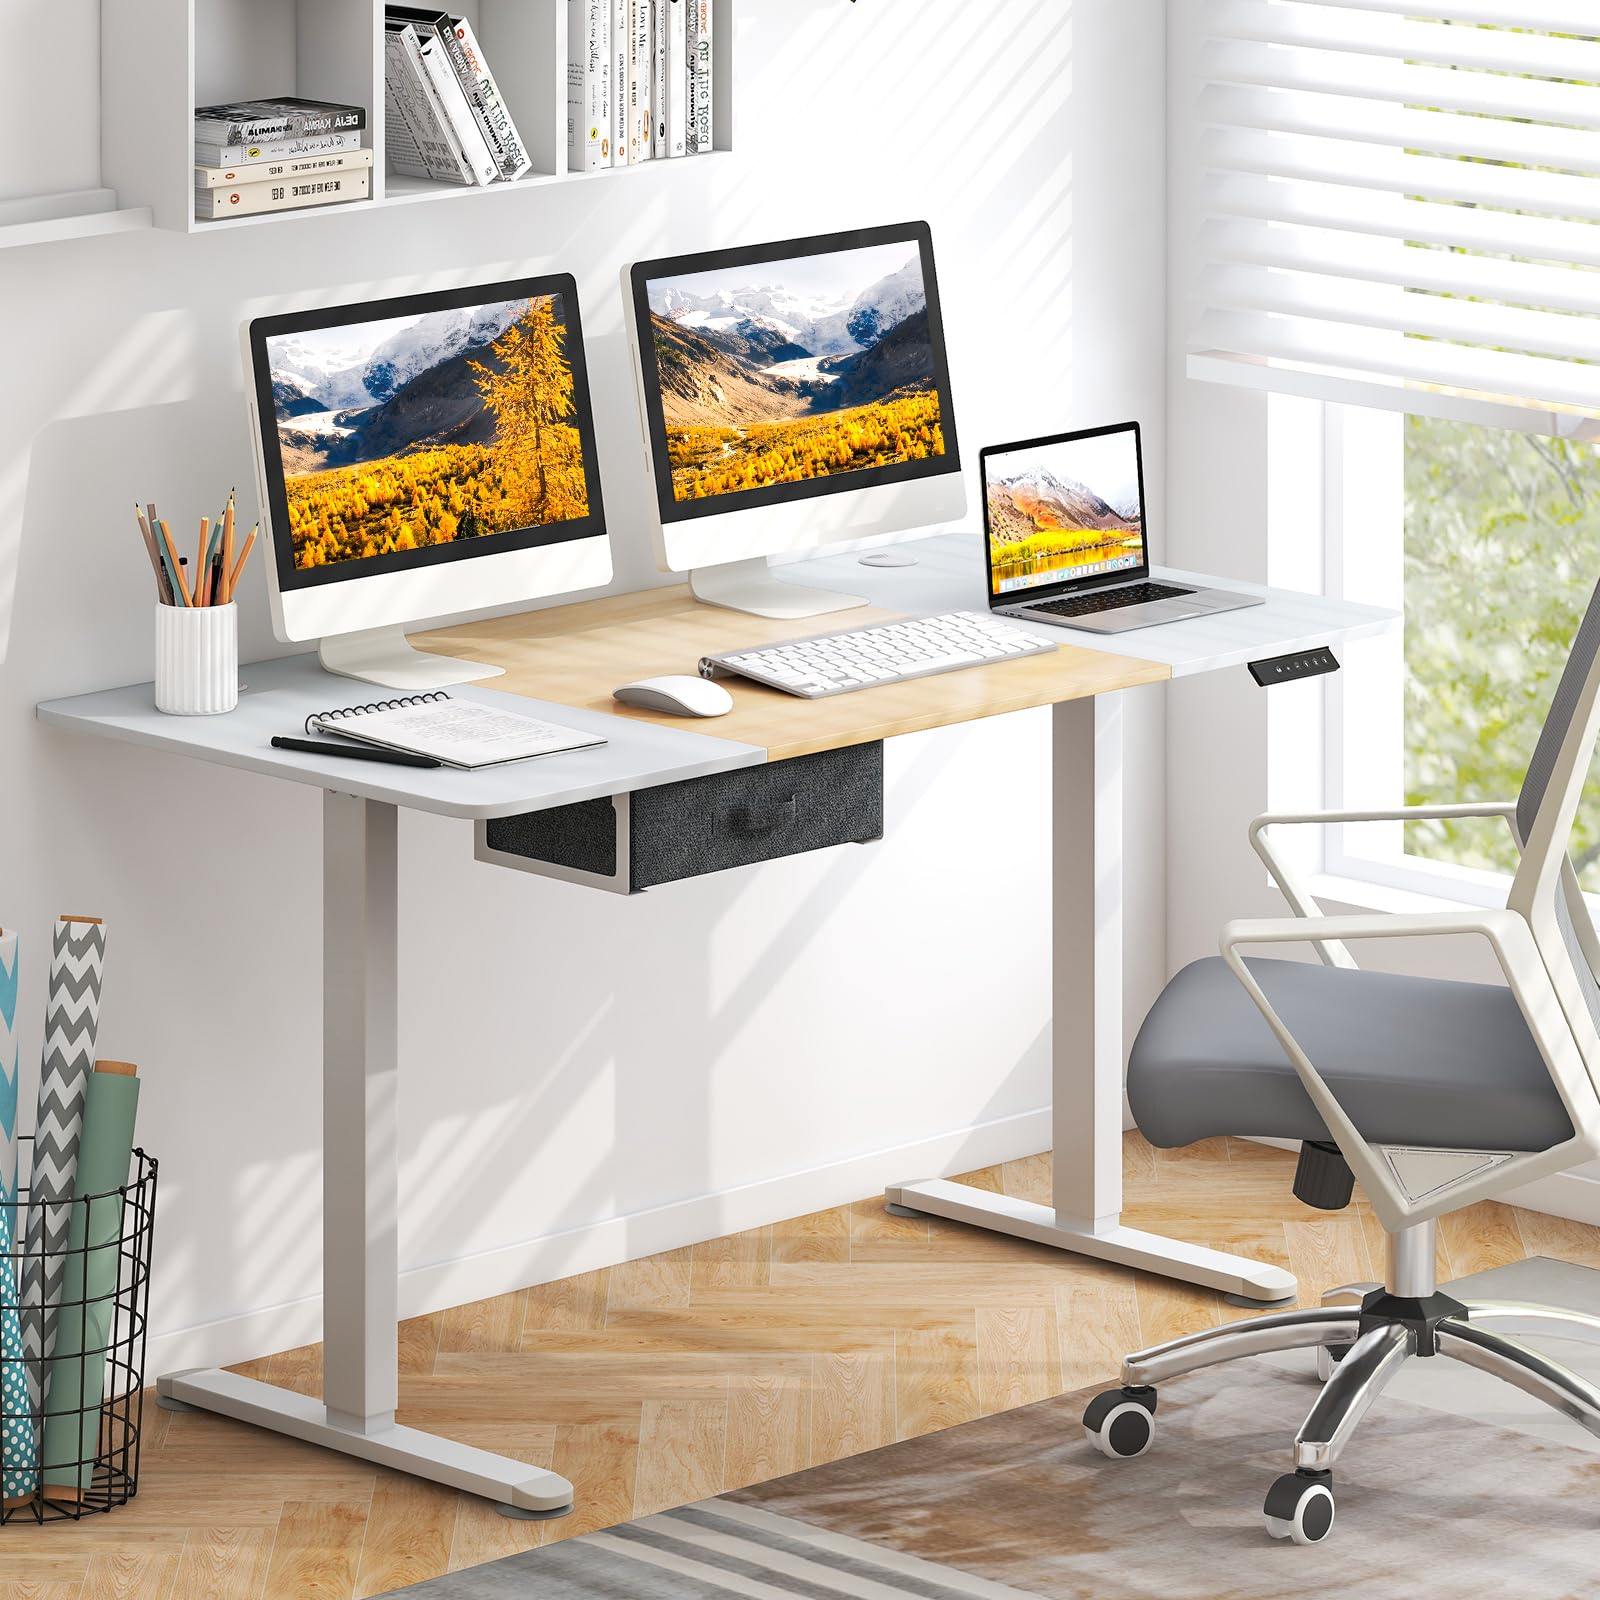 FLEXISPOT EF1 2-Tier Height Adjustable Electric Standing Desk (48 x 24)  $180 + Free Shipping